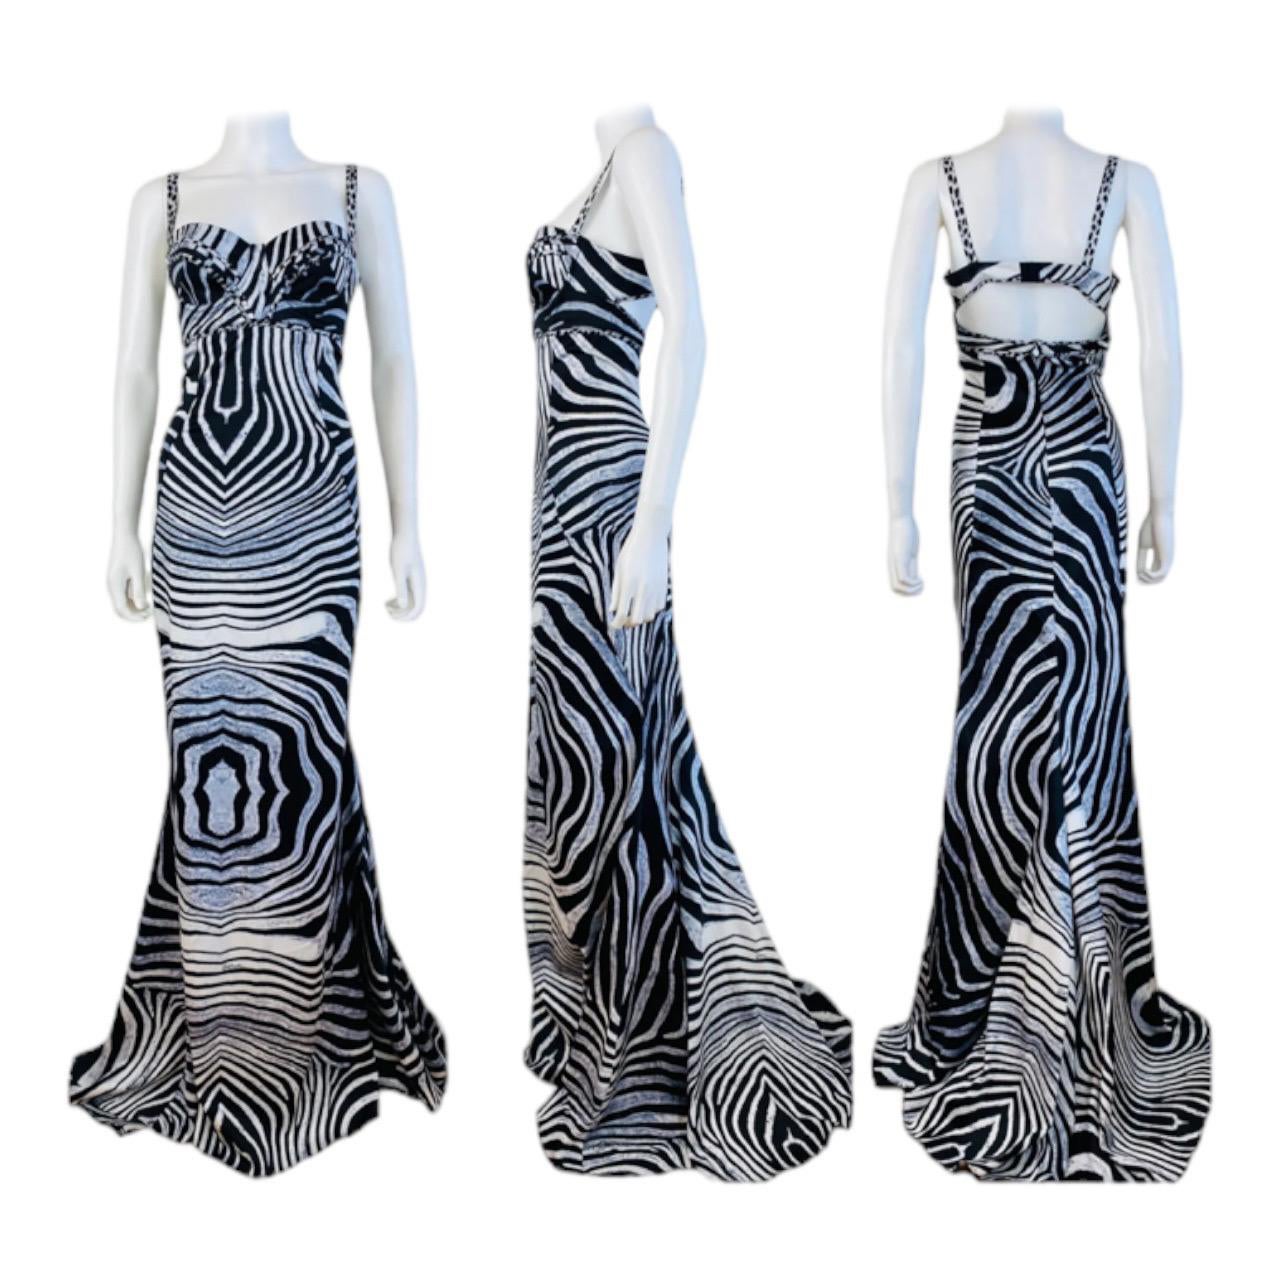 Fabulous Y2K Vintage Just Cavalli by Roberto Cavalli Dress (shown pinned)
Dramatic black + white zebra animal print
Bra bustier style bodice with fitted bust cups
Thin shoulder straps
Fitted wiggle style throughout
Cut out back with bra style